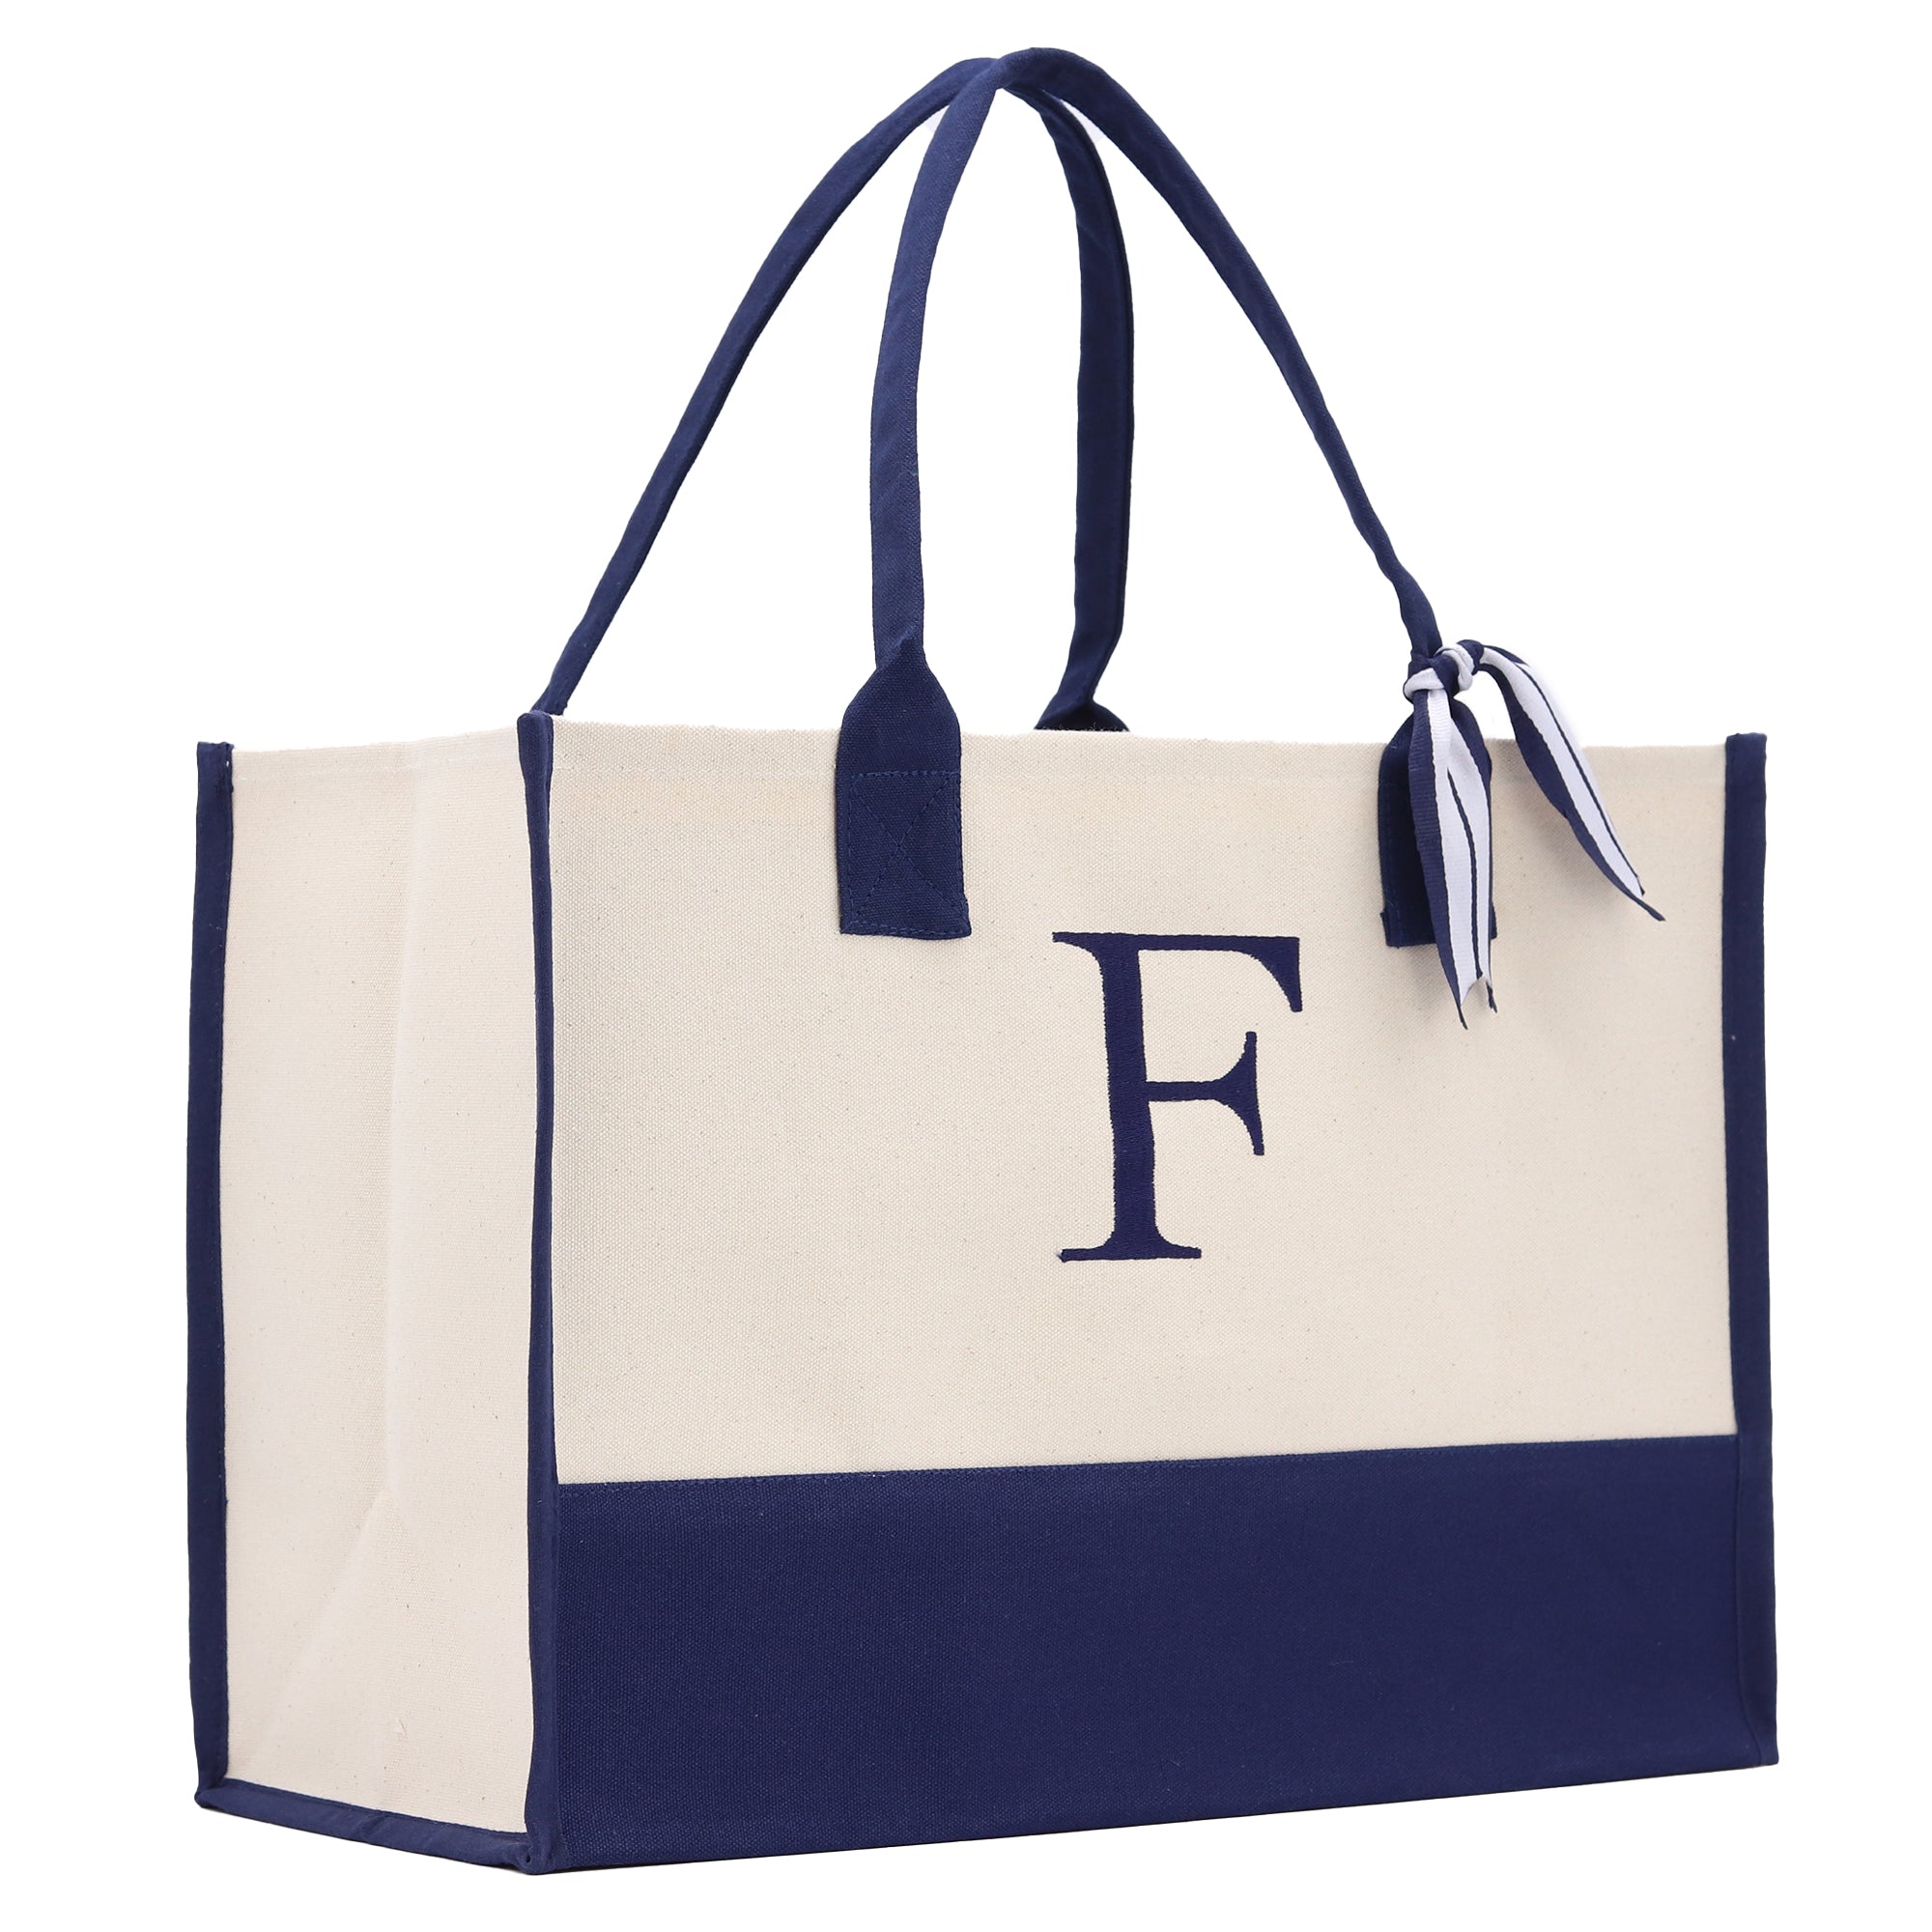 Monogram Tote Bag with 100% Cotton Canvas and a Chic Personalized Monogram Navy Blue Vanessa Rosella Block F 